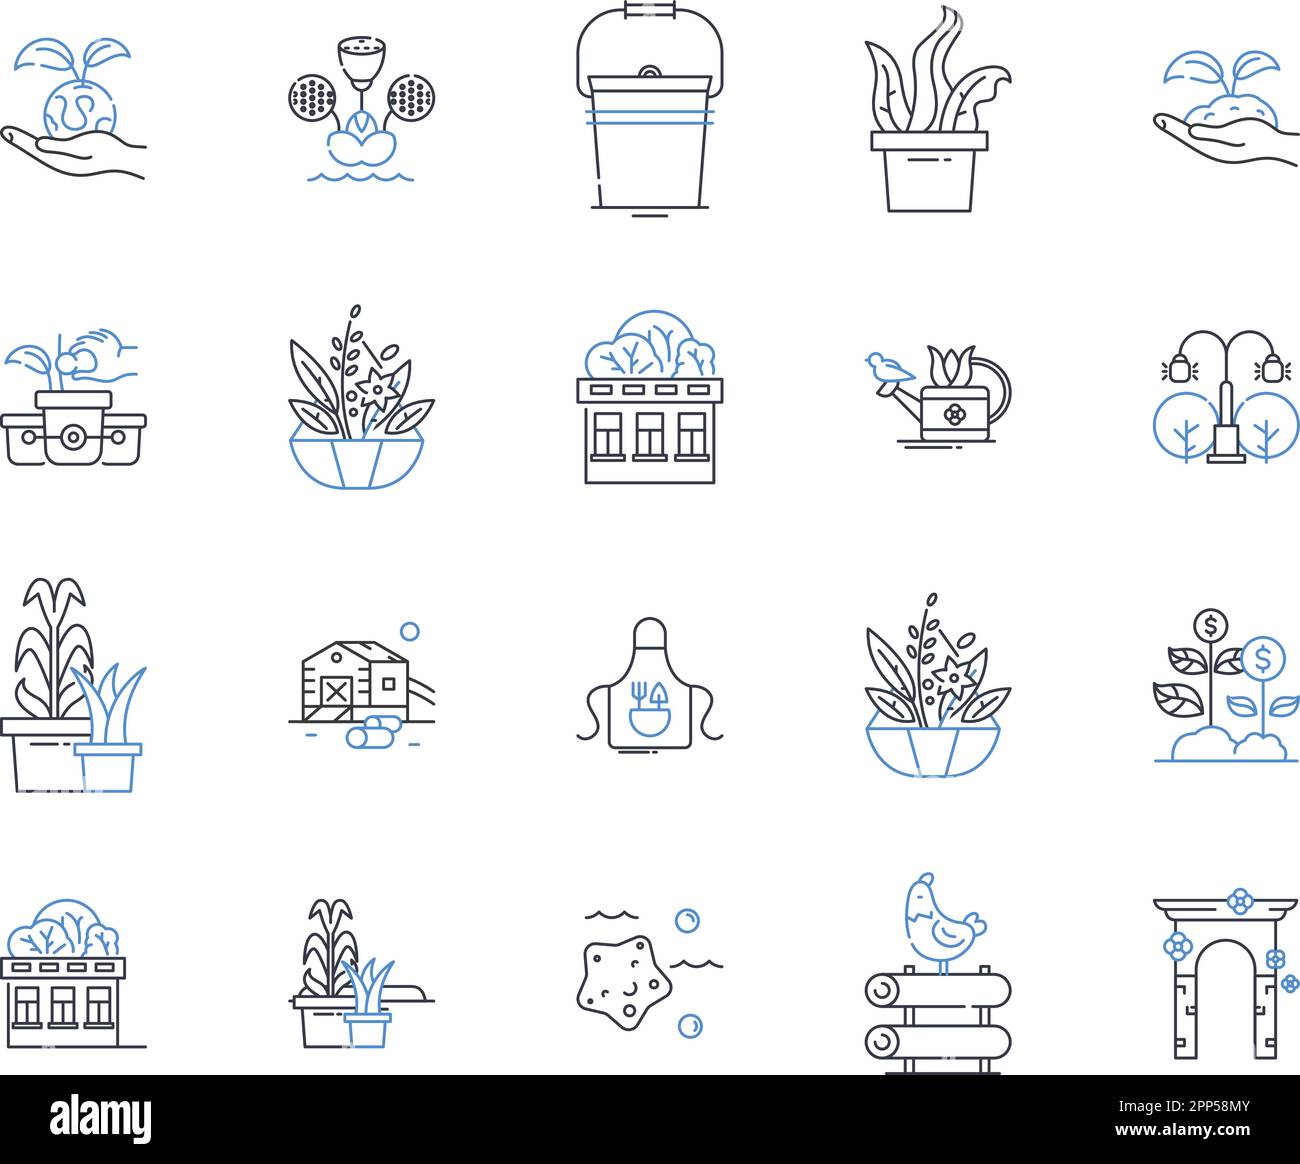 Horticulture & Cultivating line icons collection. Soil, Compost, Seeds, Fertilizer, Harvest, Greenhouse, Pruning vector and linear illustration Stock Vector